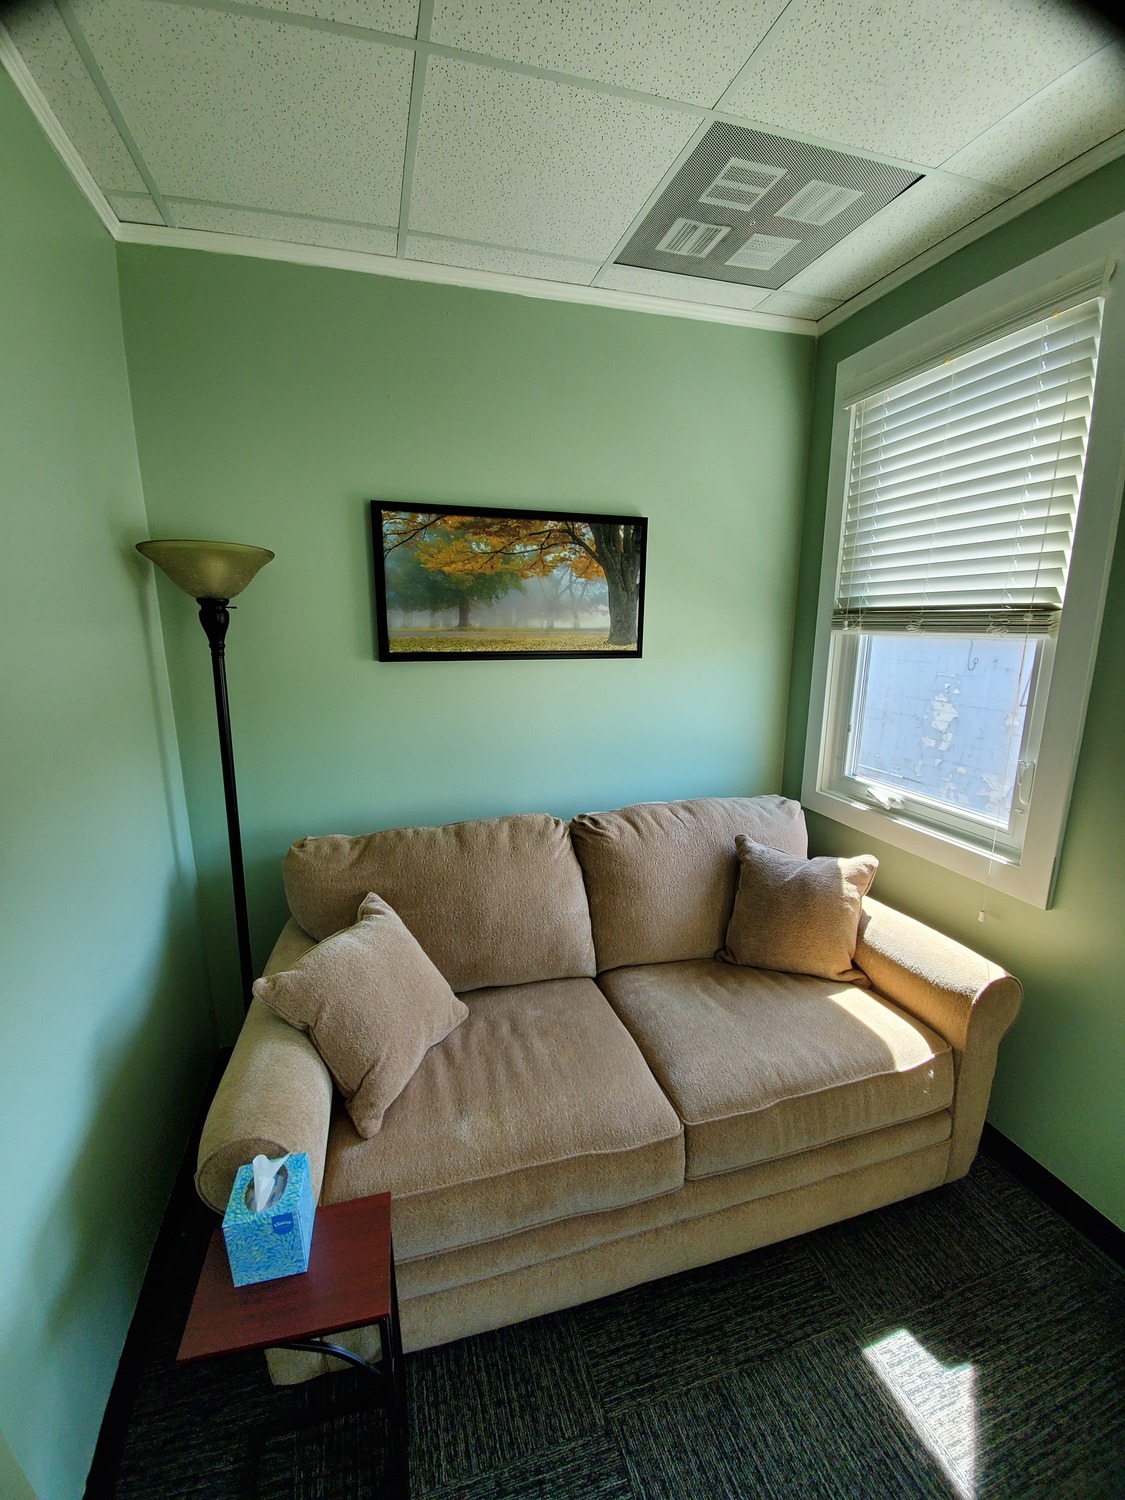 Gallery Photo of Client sitting area.